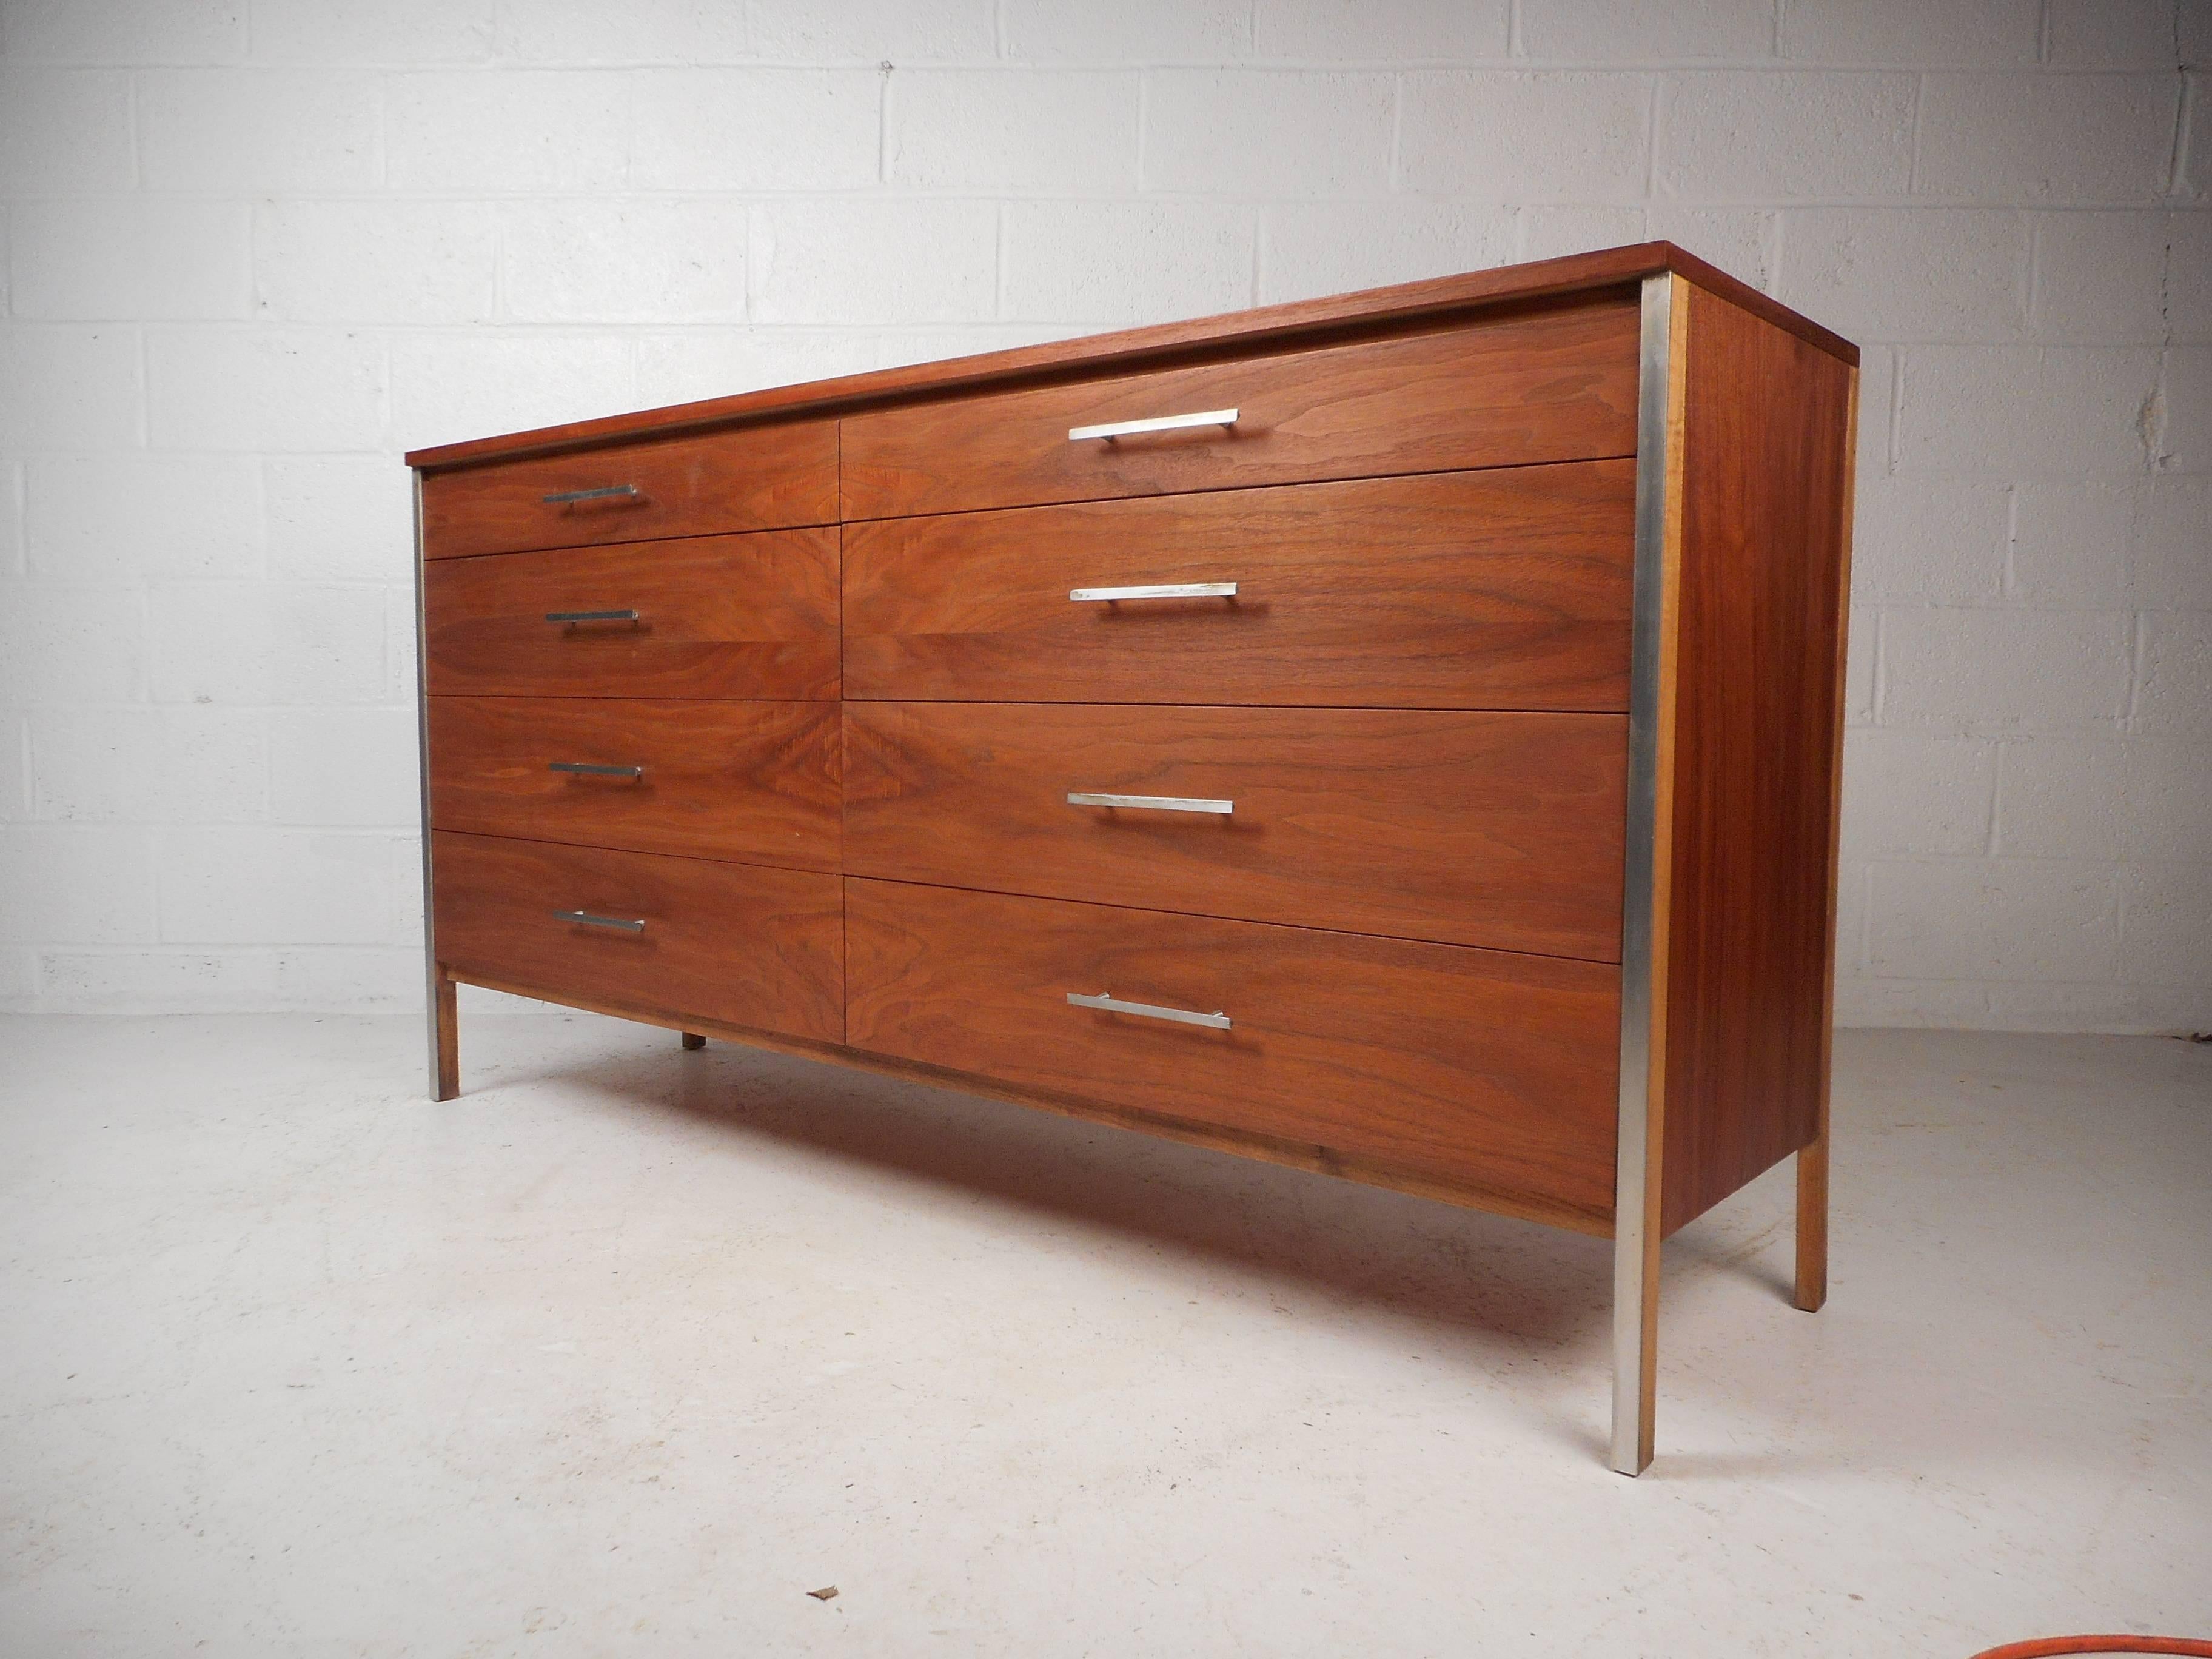 Beautiful Paul McCobb walnut dresser with aluminum drawer pulls and leg accents. Striking mid-century modern dresser designed for Calvin furniture makes the perfect vintage addition to any bedroom. Please confirm item location (NY or NJ) with dealer.